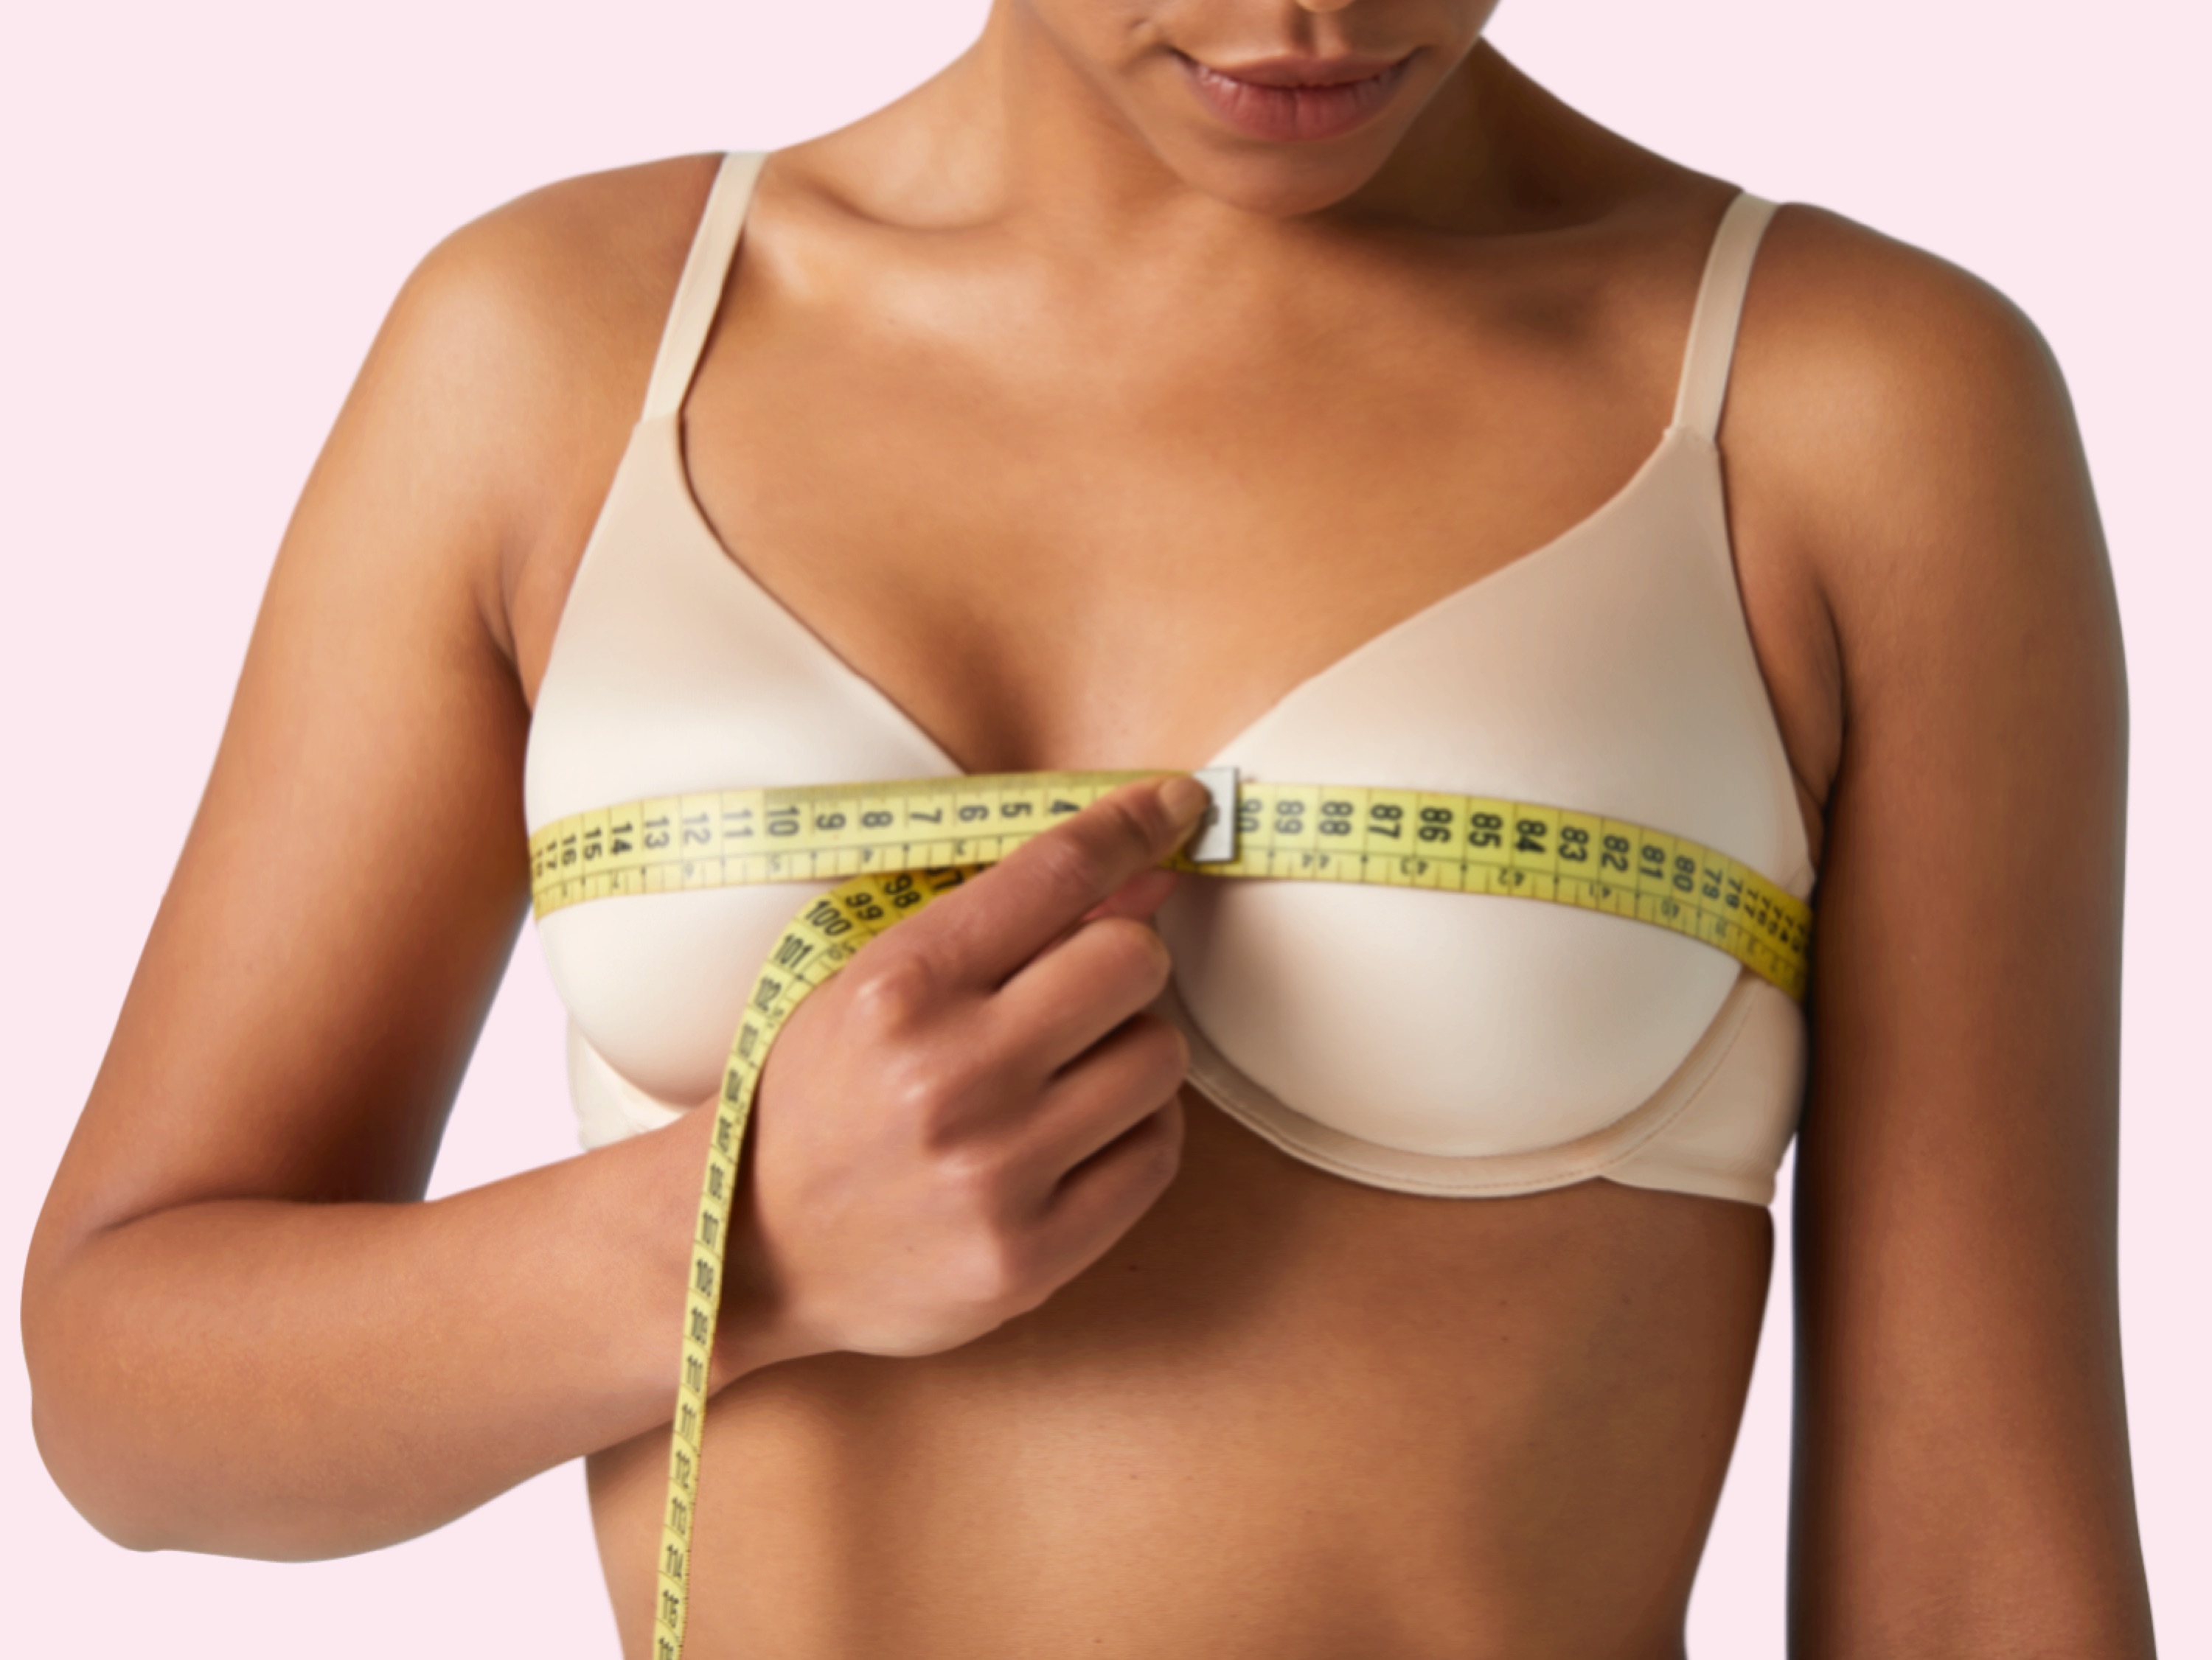 Looking for a Bra Fitting in Melbourne? We have you covered – She Science